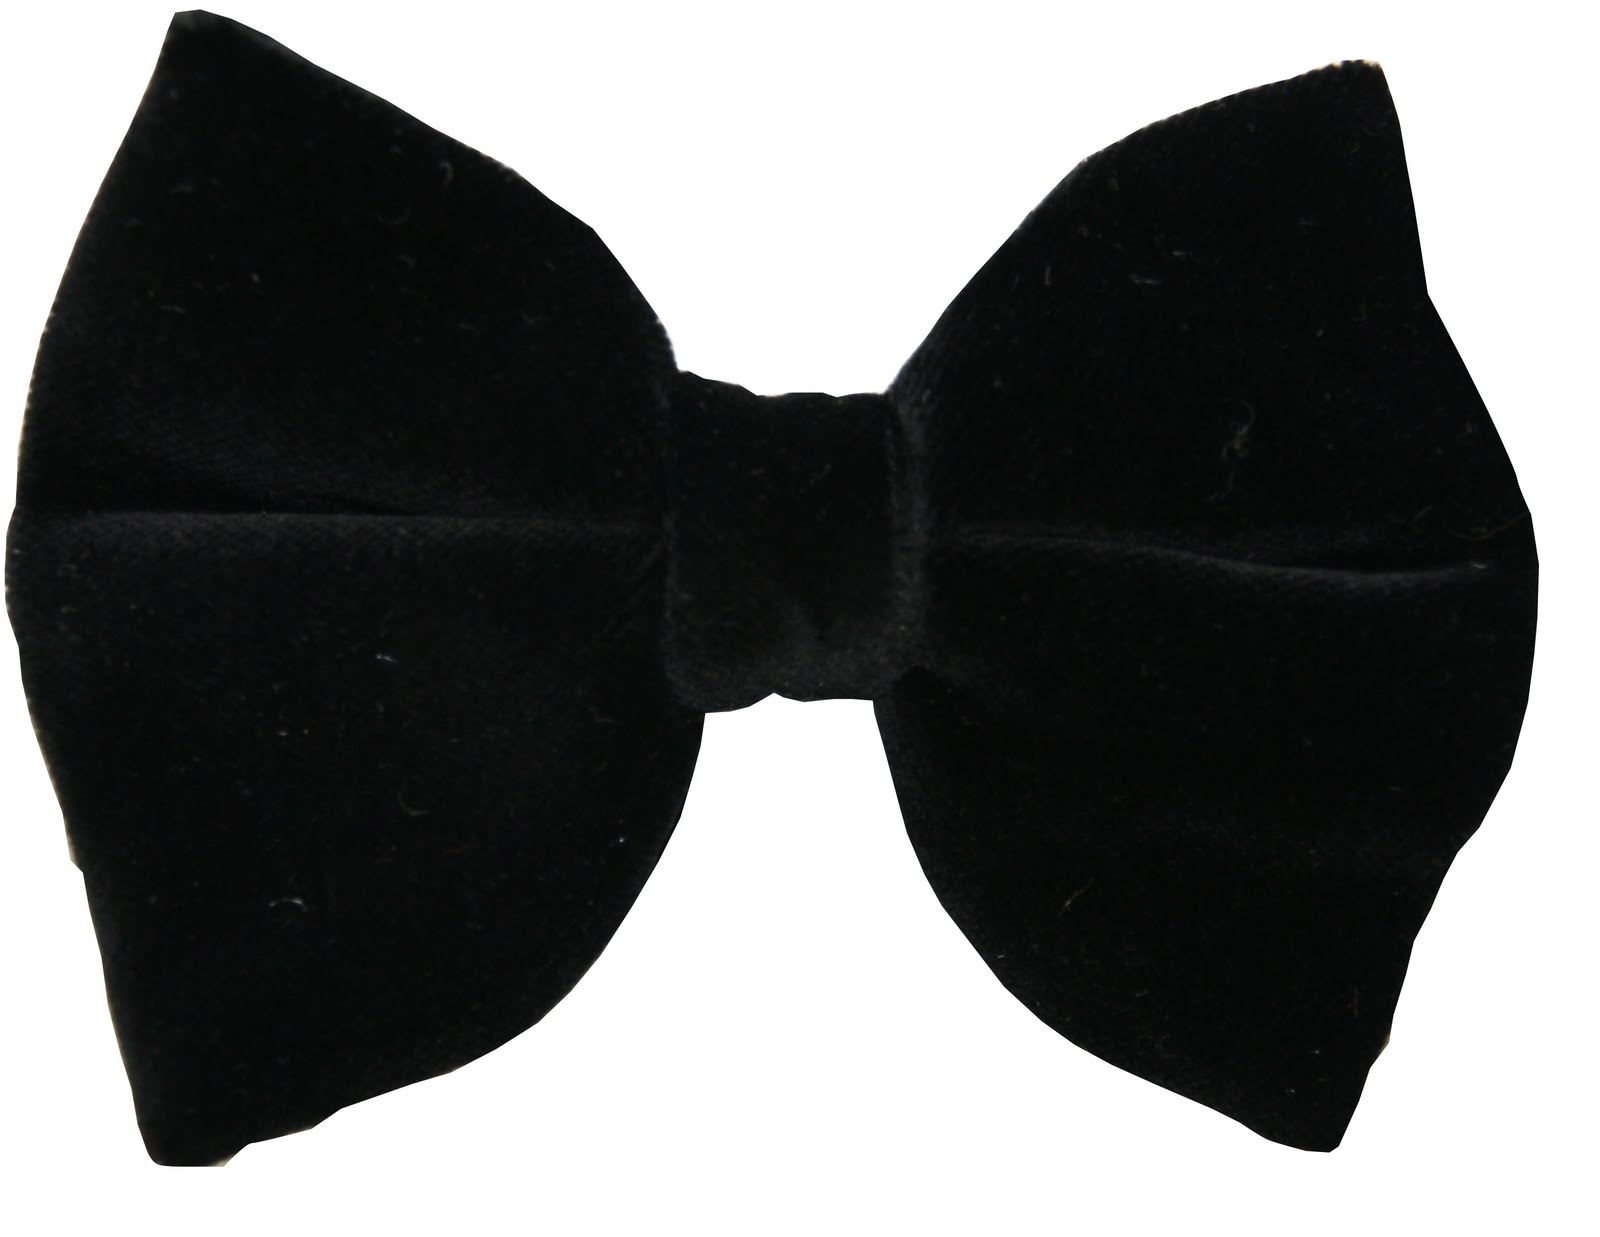 LE NOEUD PAPILLON: The Problem With Photographing Velvet Bow Ties ...